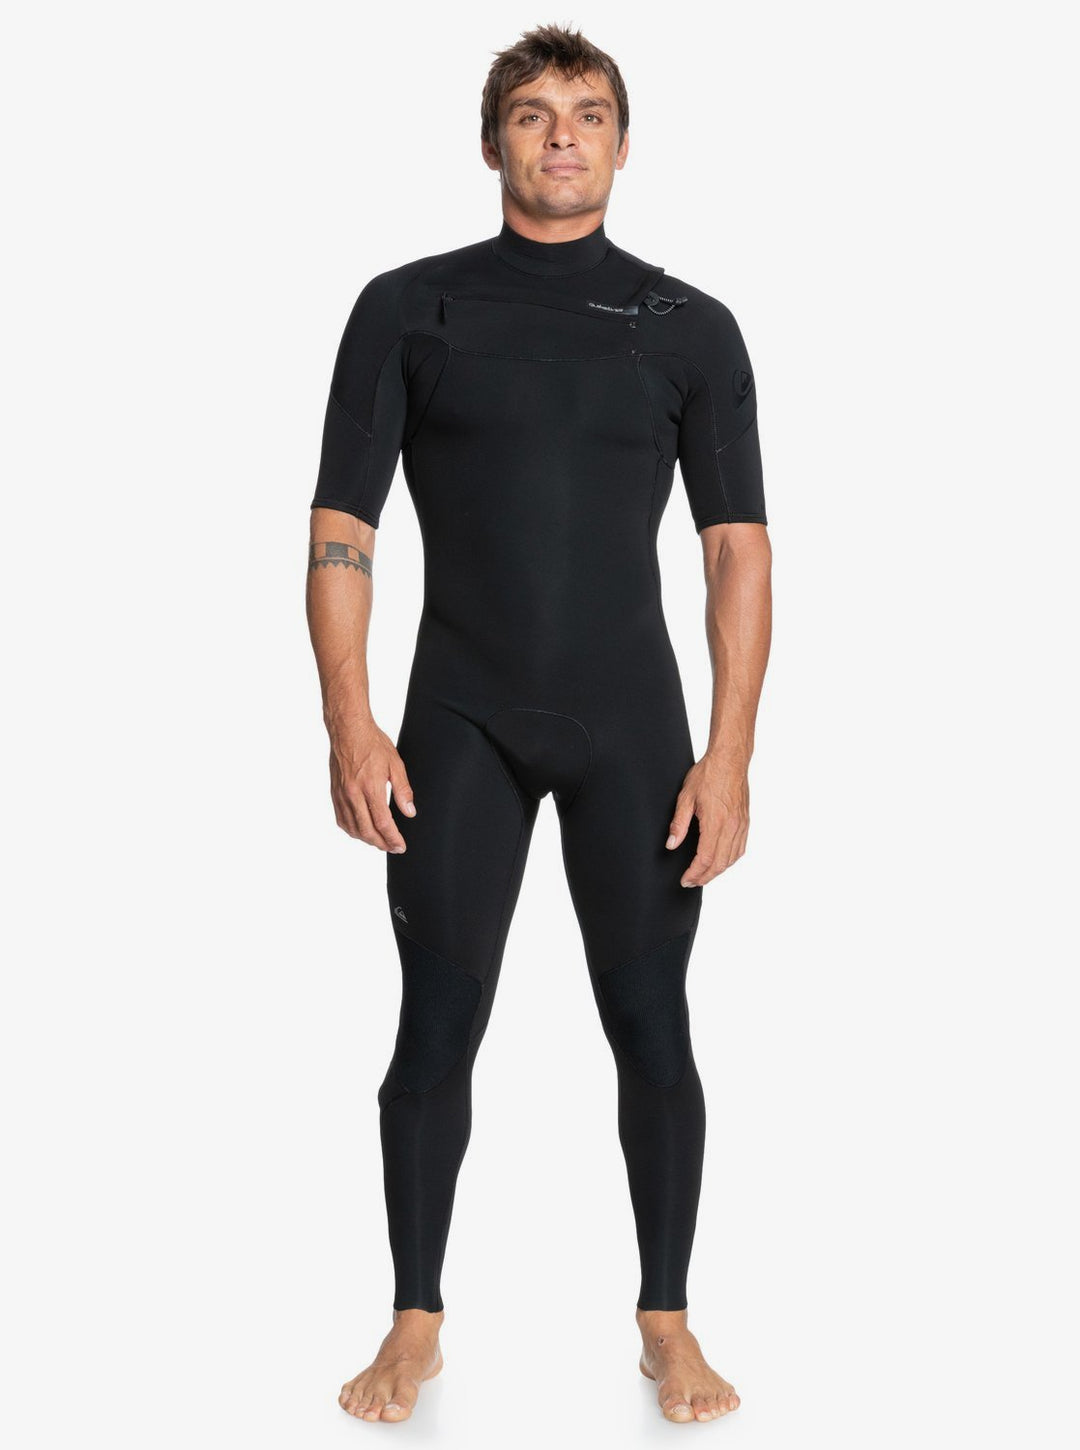 Everyday Sessions 2/2 Short Sleeve Chest Zip Steamer Wetsuit - Black